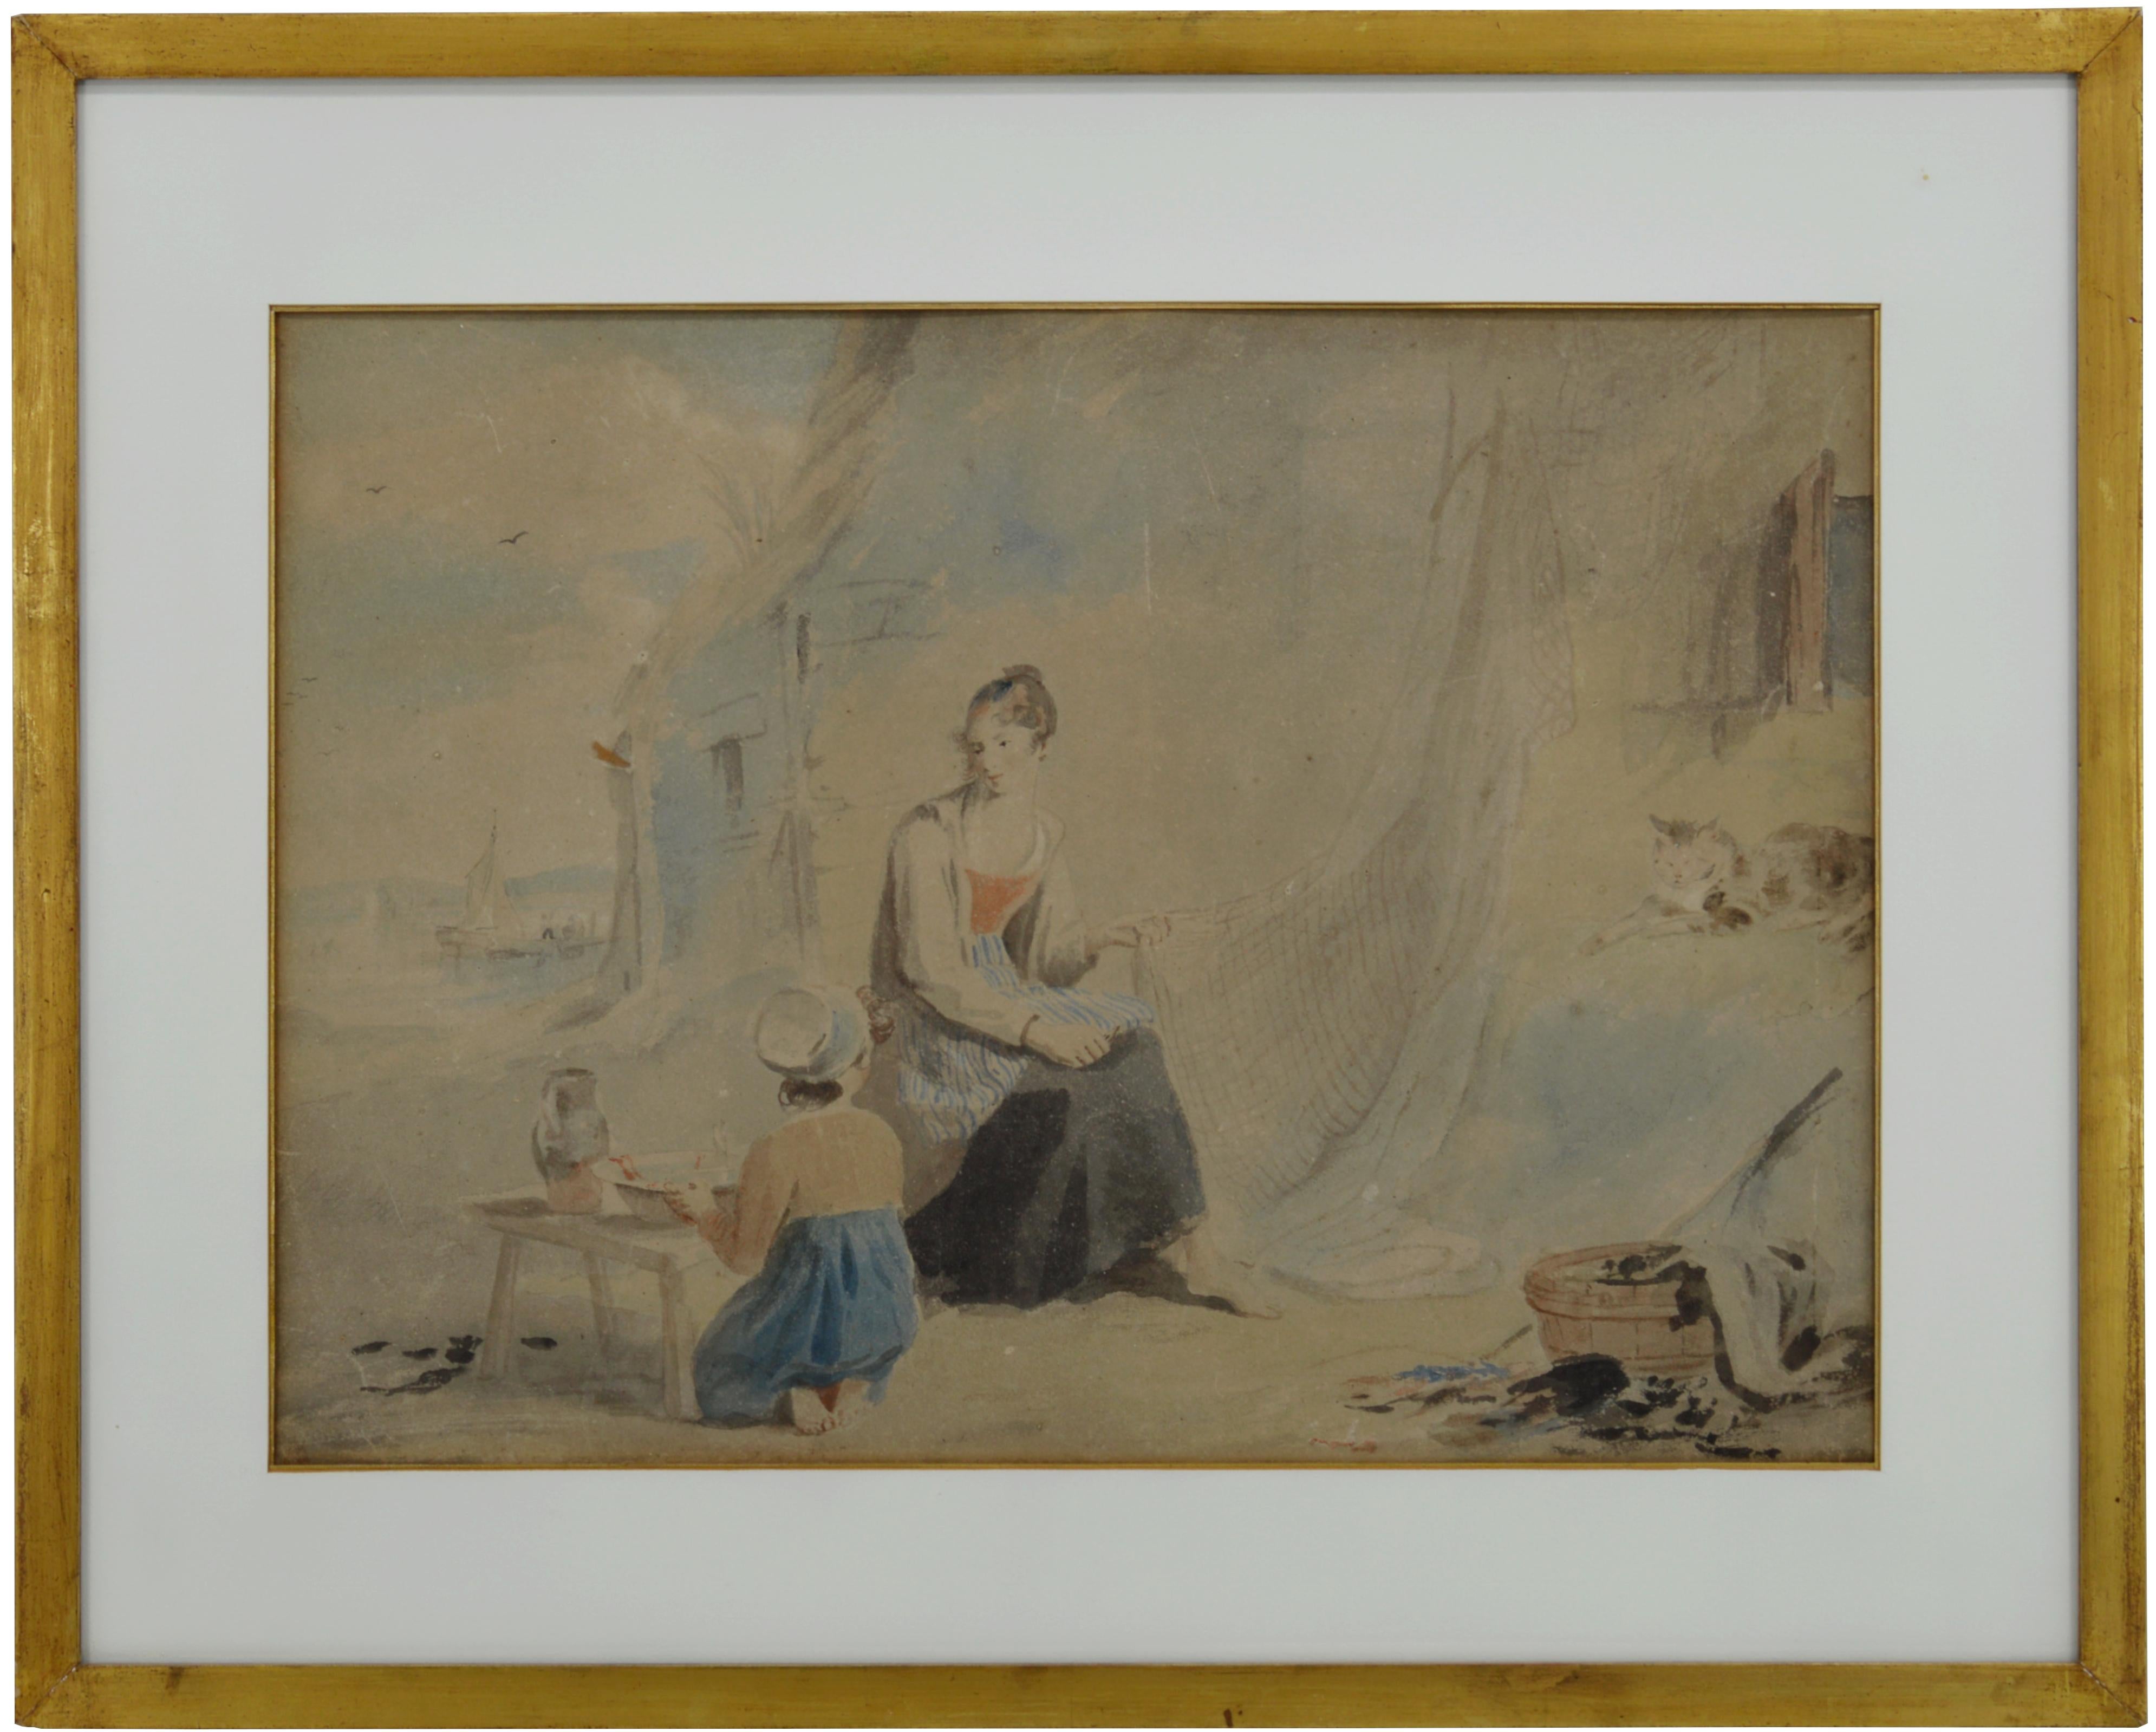 Precious Watercolor attributed to James WARD (1769-1859) - England, 1830-1840. The Fisherman' S Family. Measurements : View : 20"x14.6" (51x37 cm), With frame : 26.6"x21.5" (67.5x54.5 cm). The frame is gilded with gold leaves. Unsigned. Purchased in